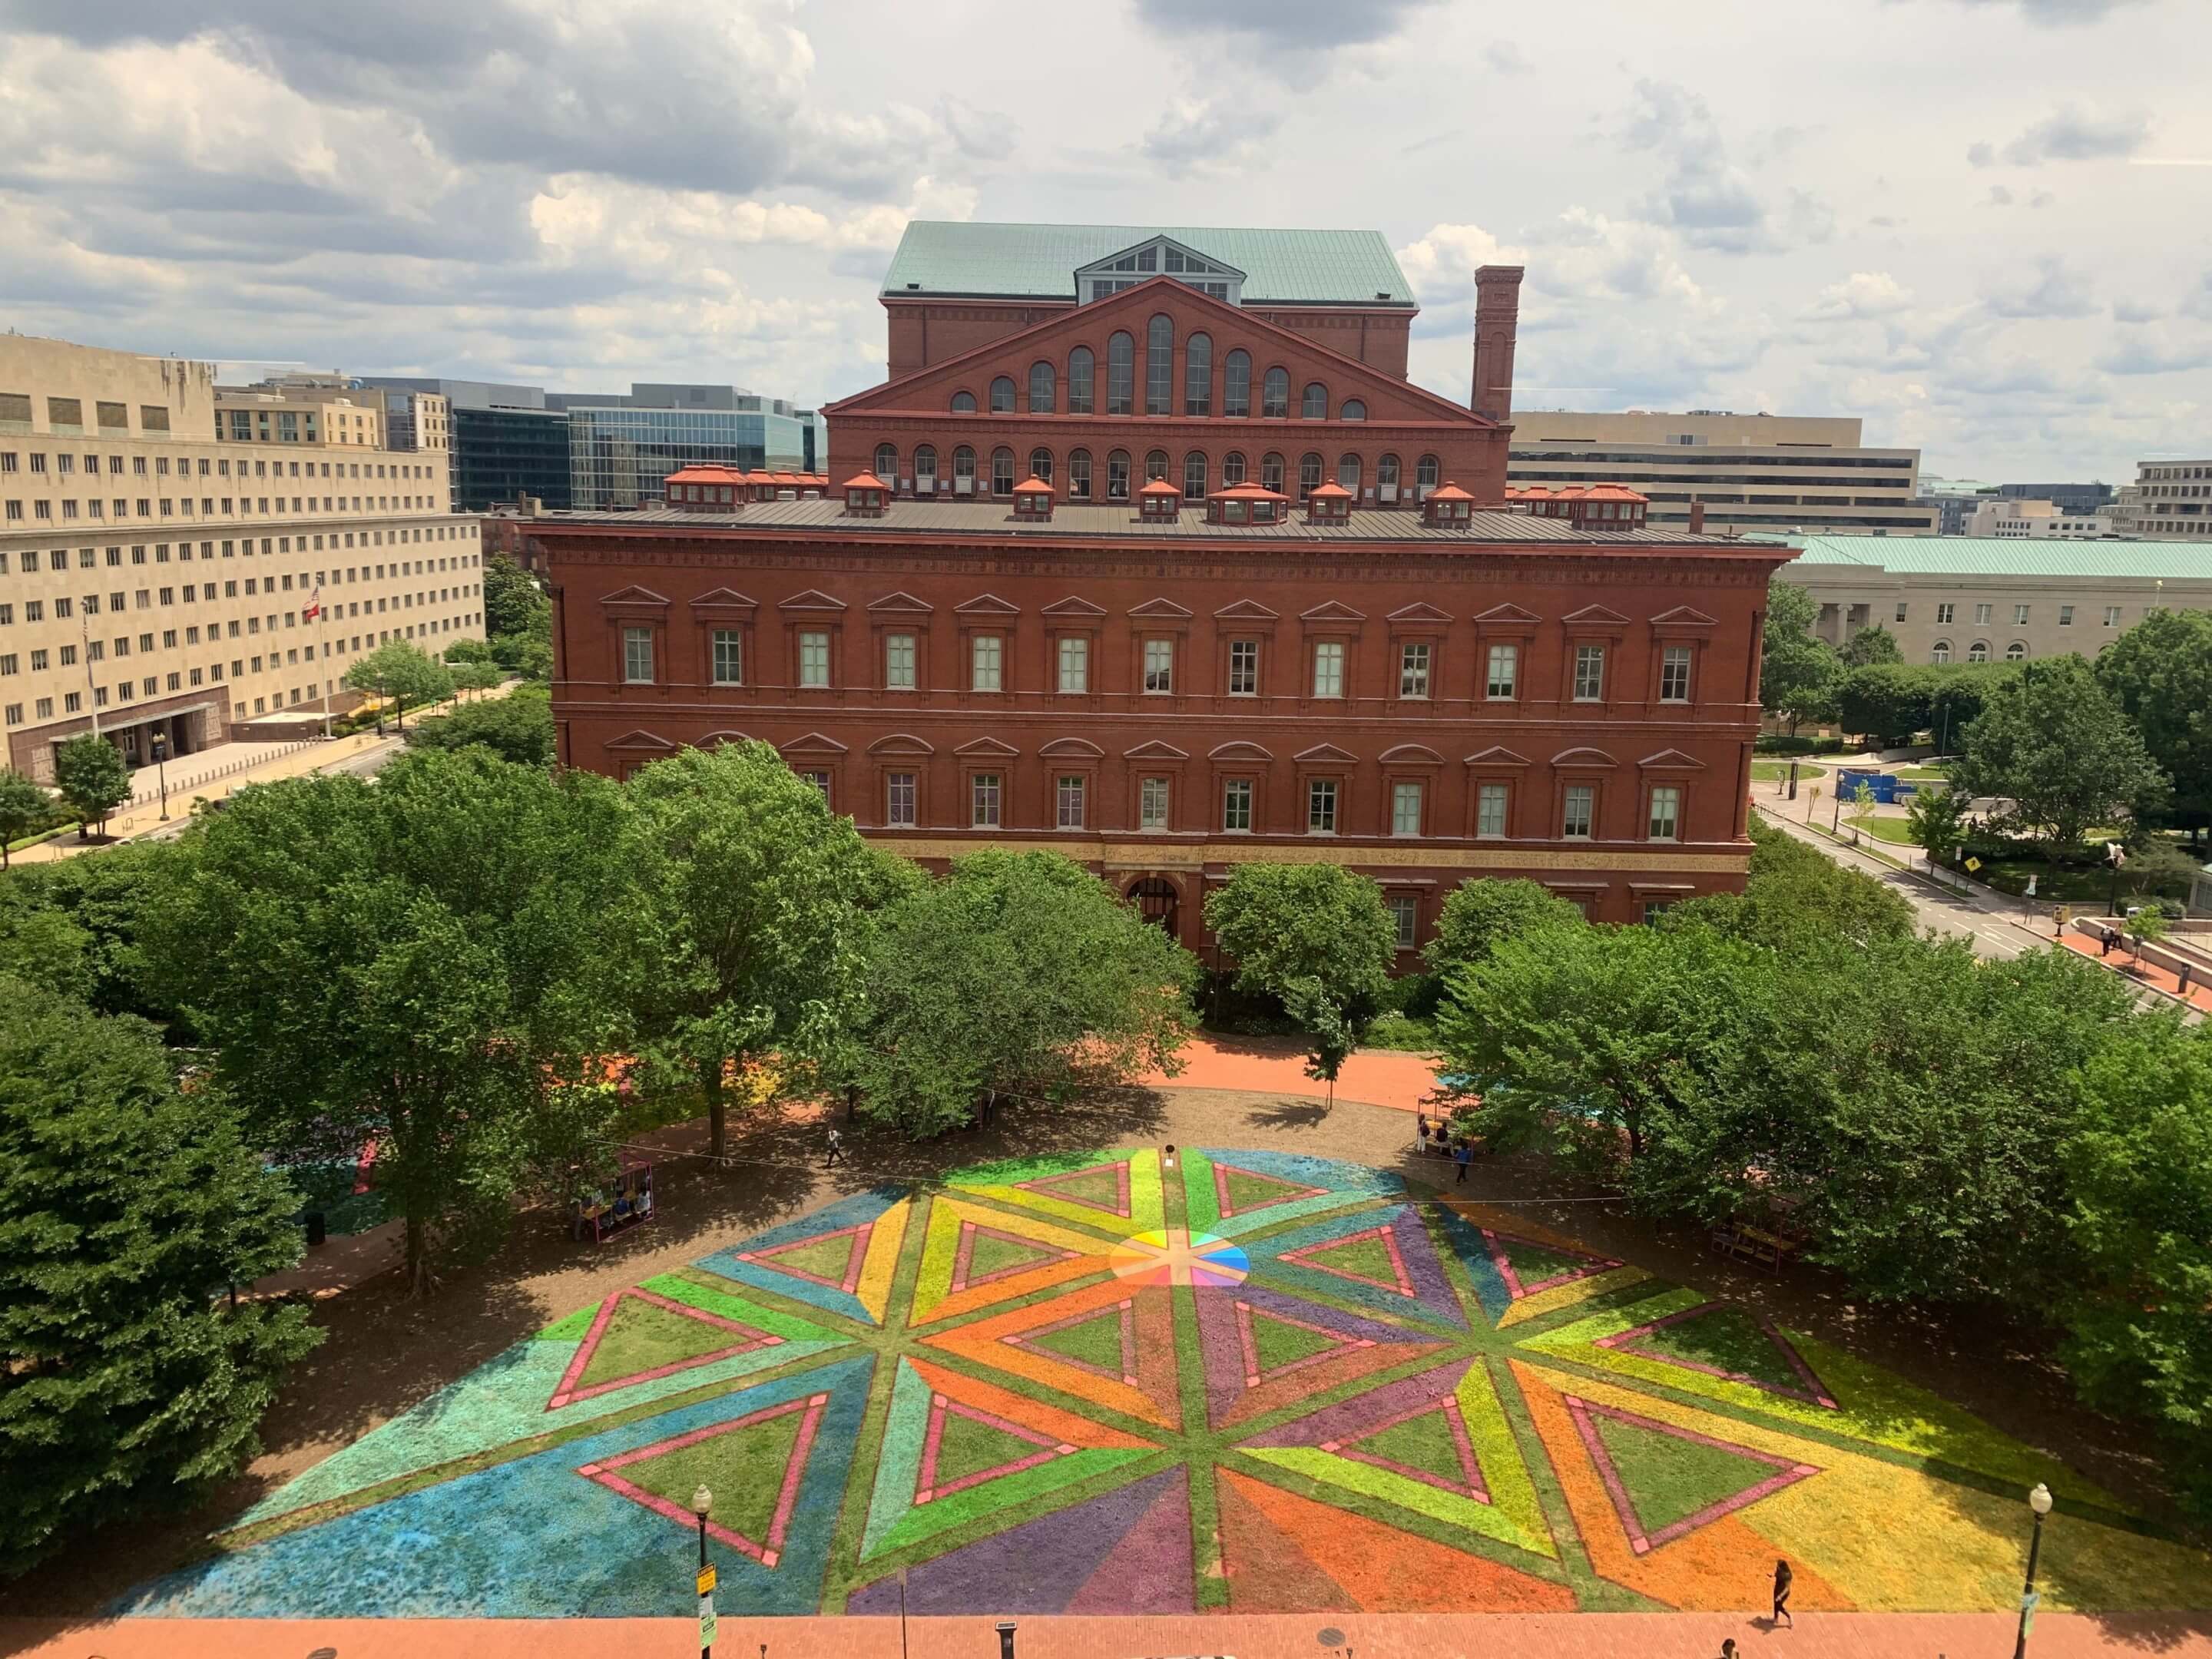 The National Building Museum’s Summer Block Party returns with an